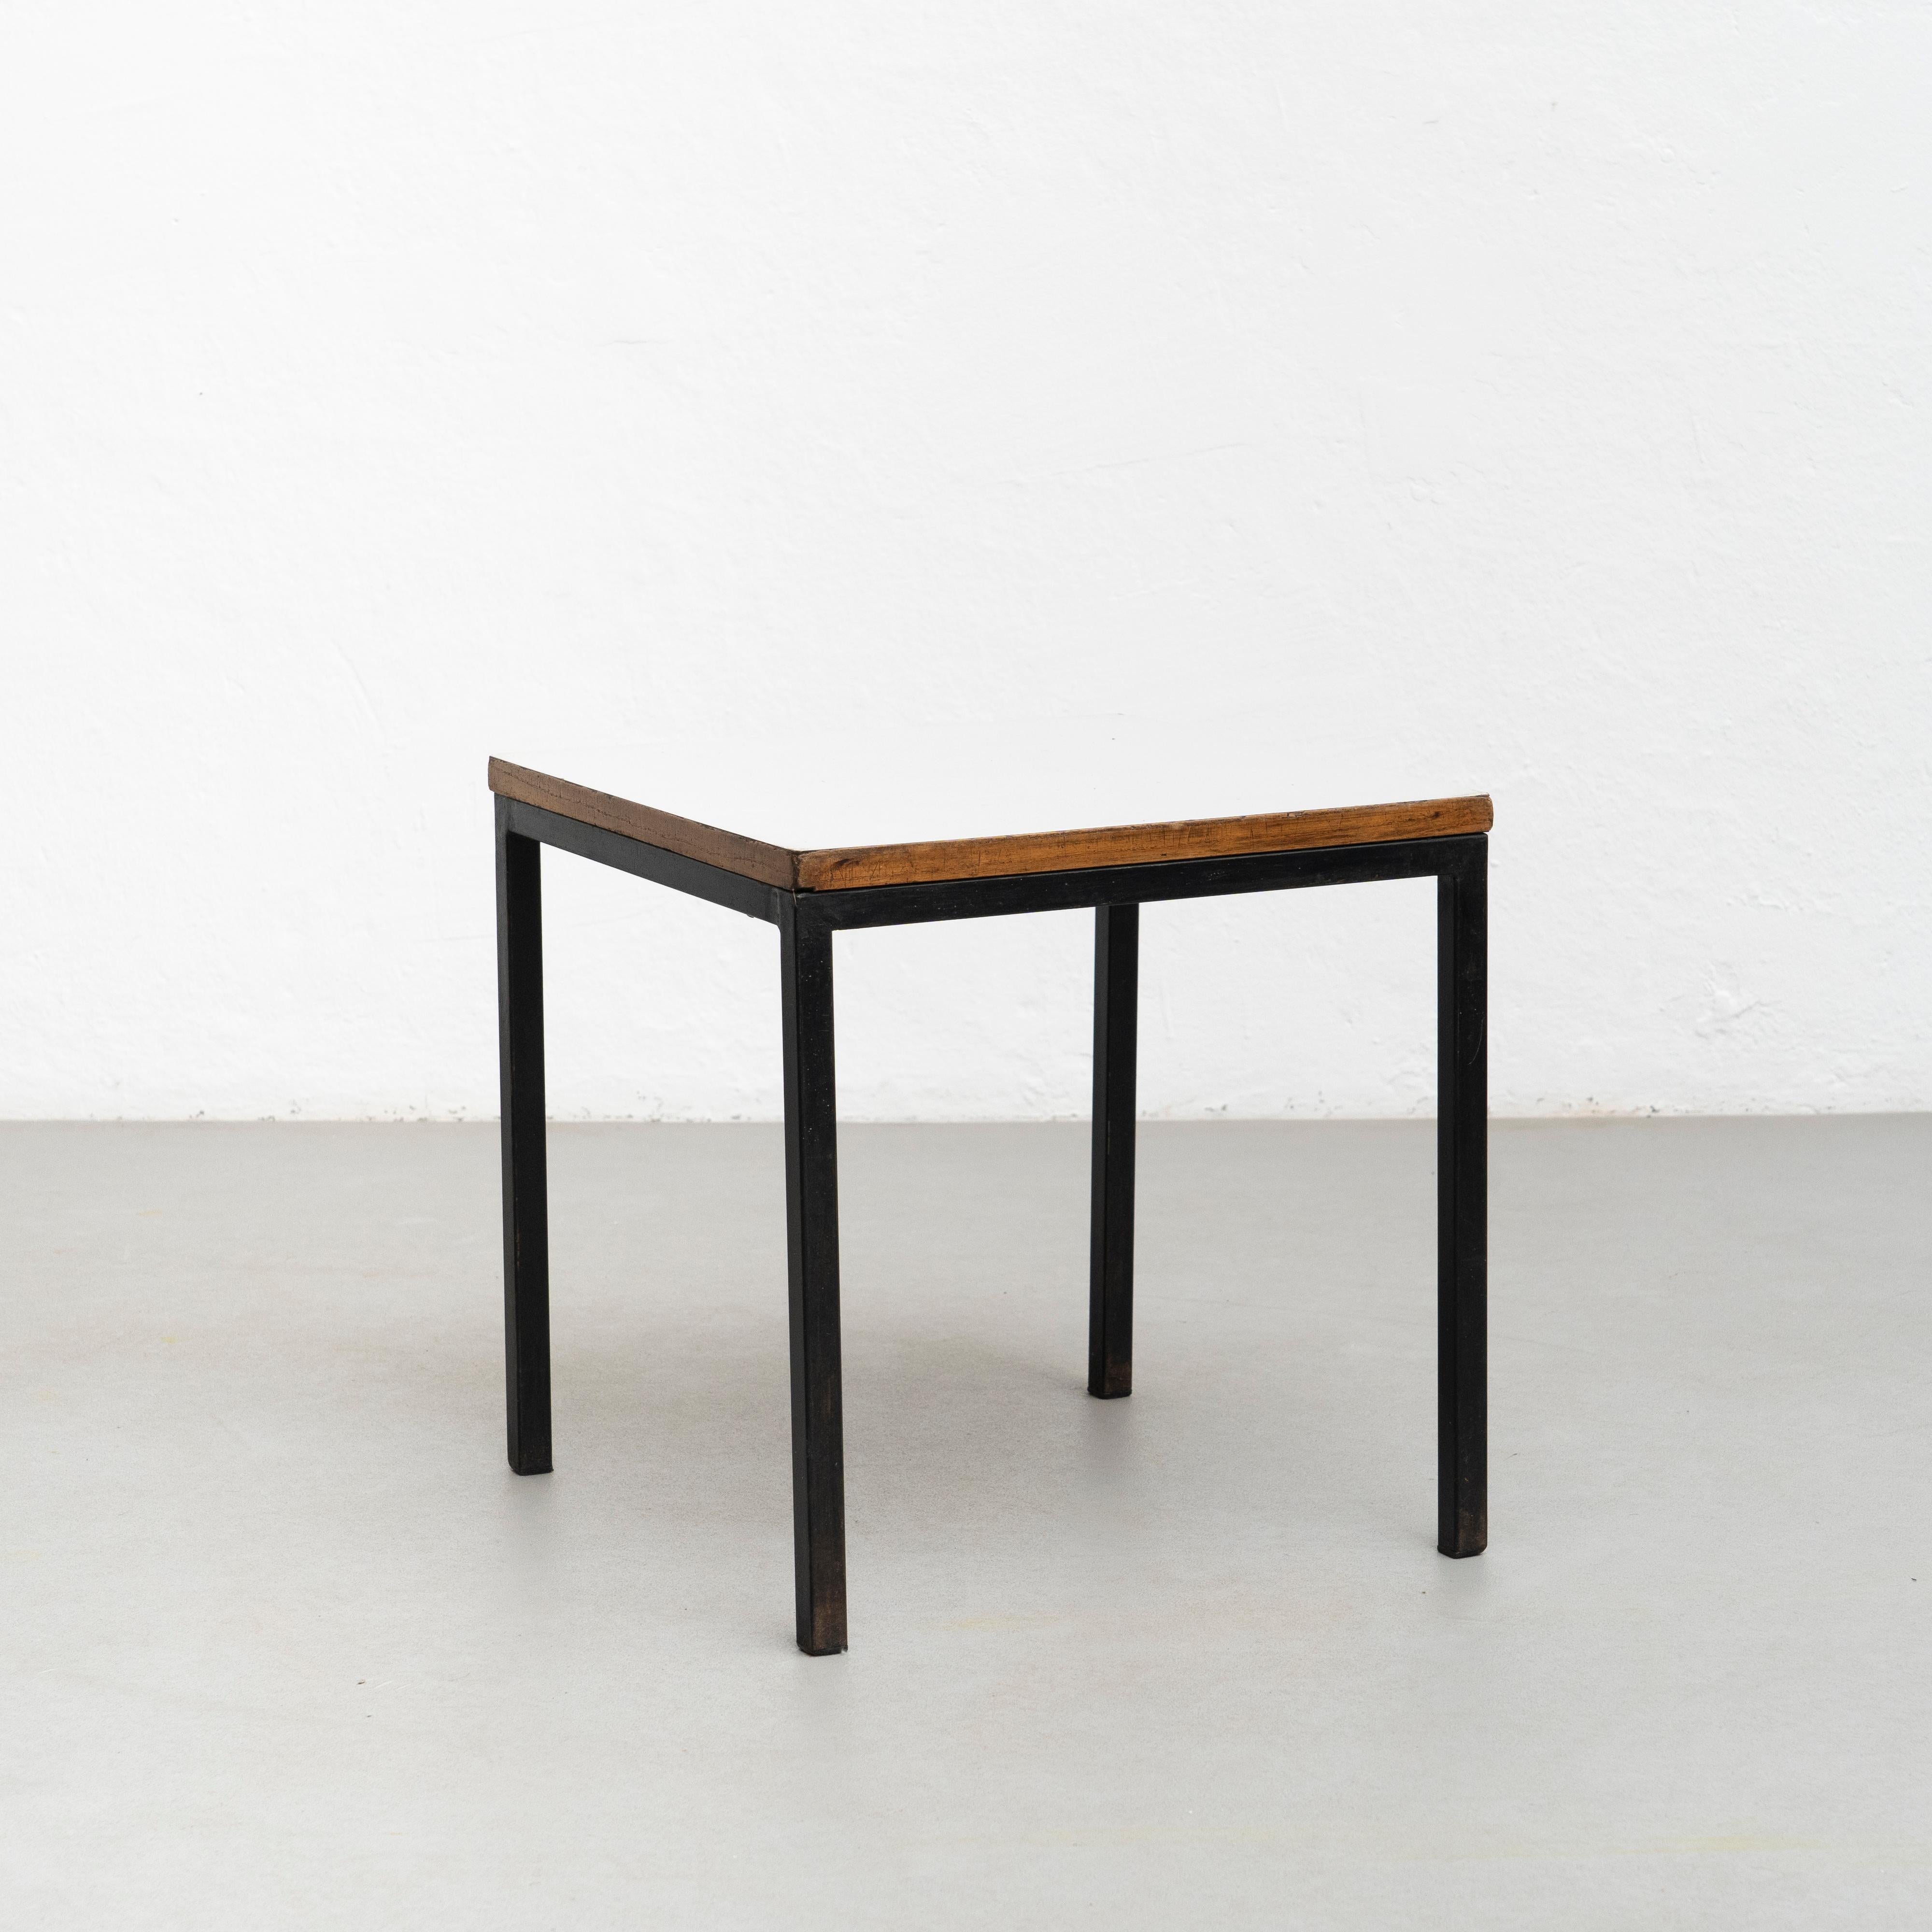 Mauritanian Charlotte Perriand Metal, Wood and Formica Table for Cansado, circa 1950